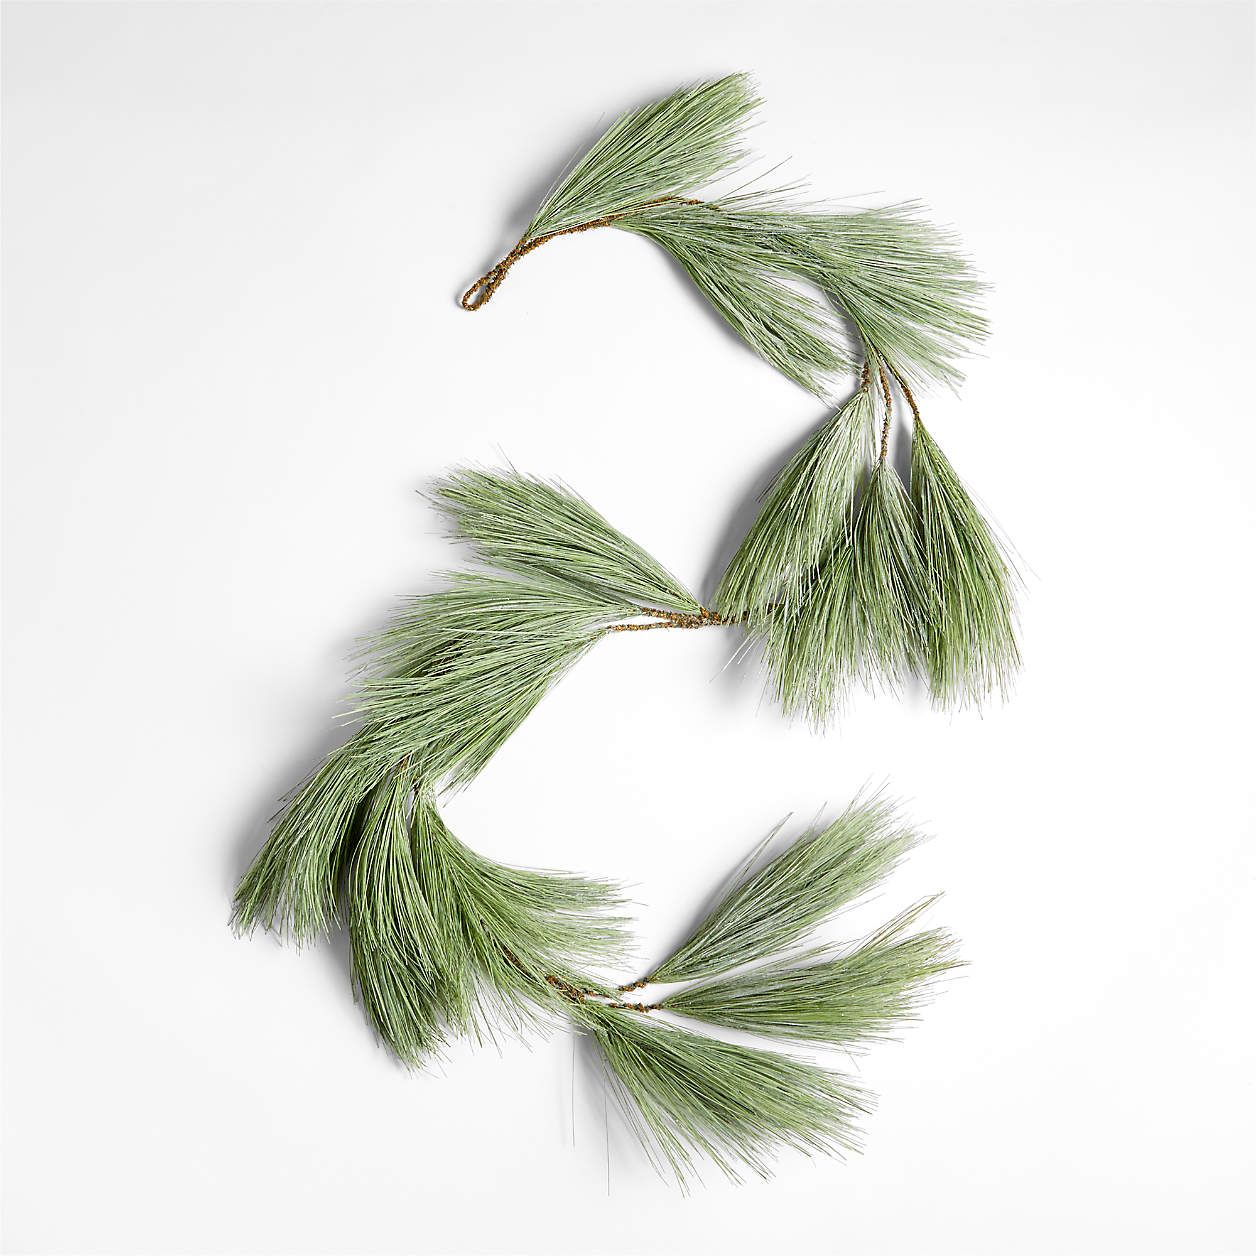 Faux Long Needle White Pine Wreath 32" | Crate and Barrel | Crate & Barrel